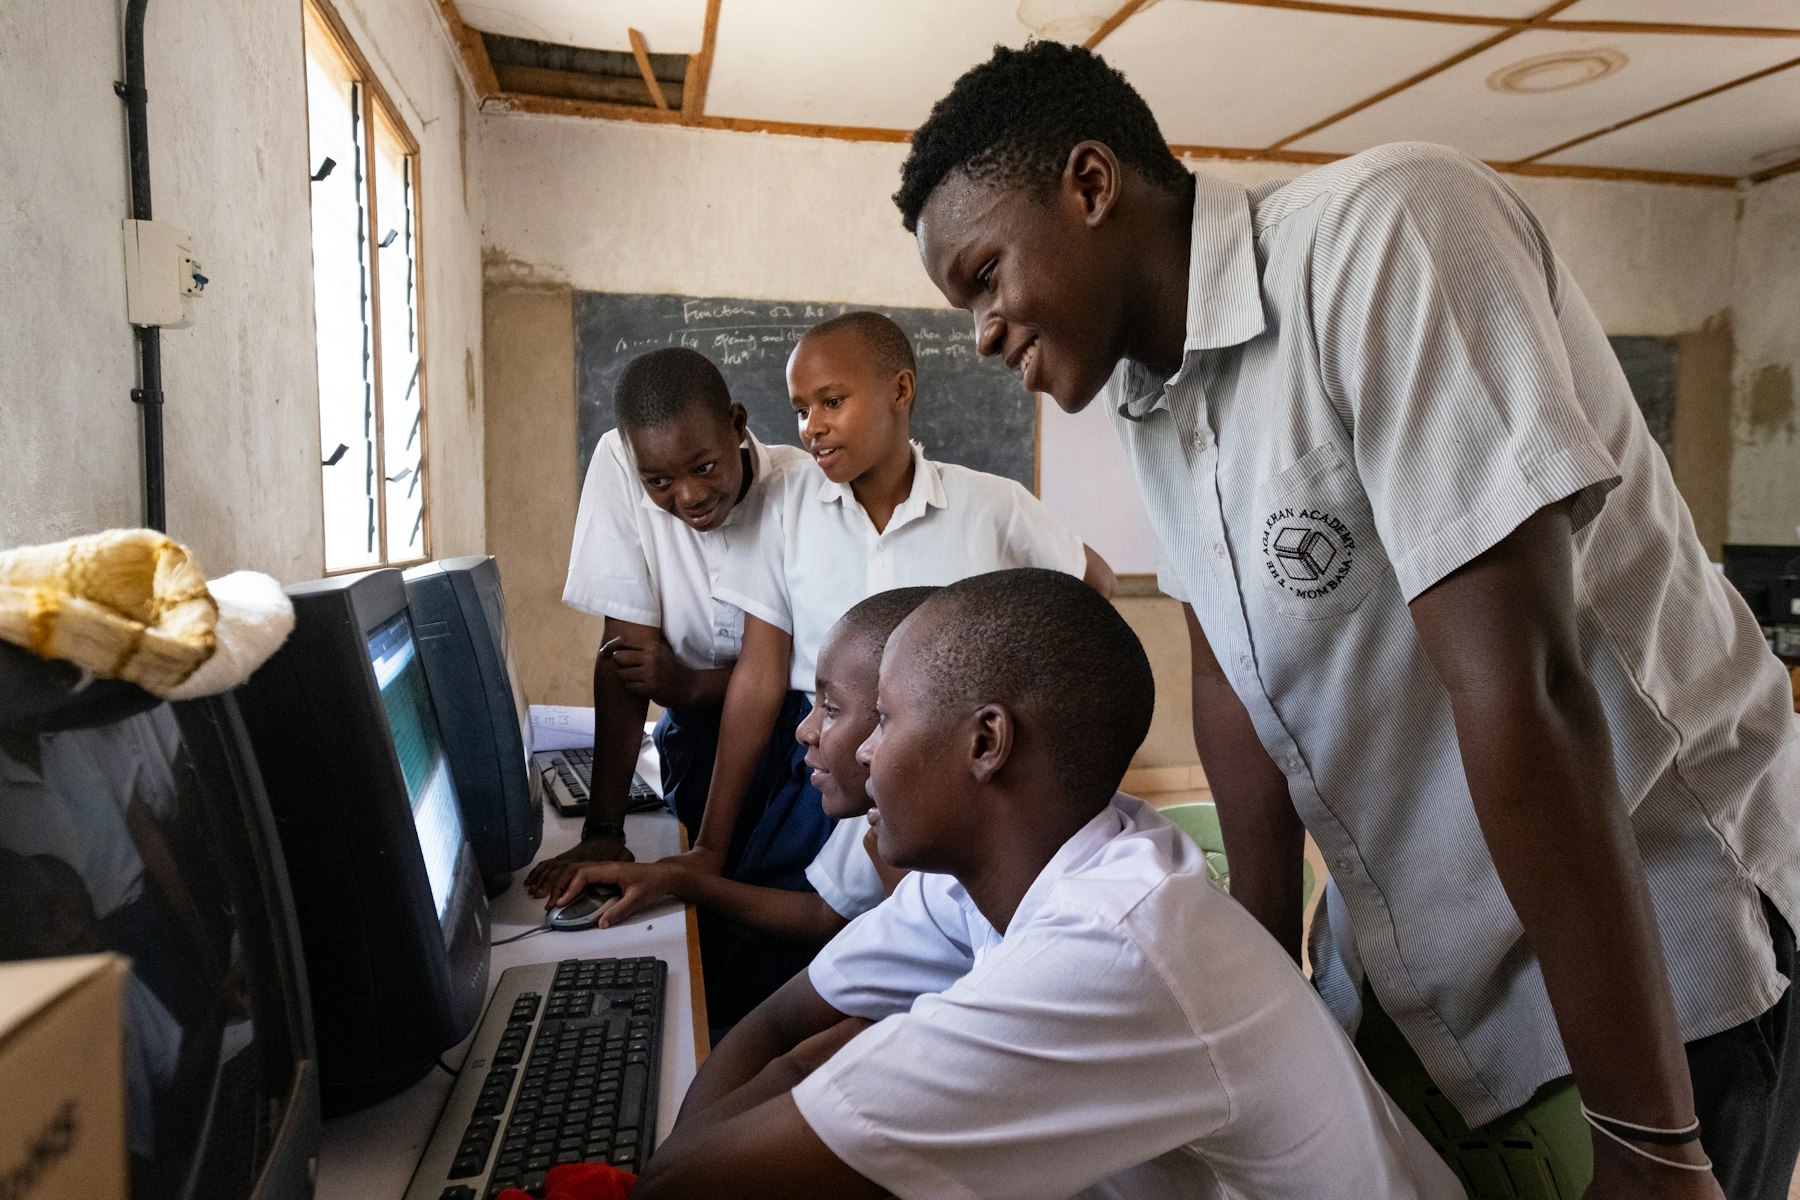 Aga Khan Academy Mombasa student Raphael Mwachiti (right) assisted in the computer lab at his former primary school, Saint Joseph’s, encouraging the young students to study harder so they could “make something of themselves”.